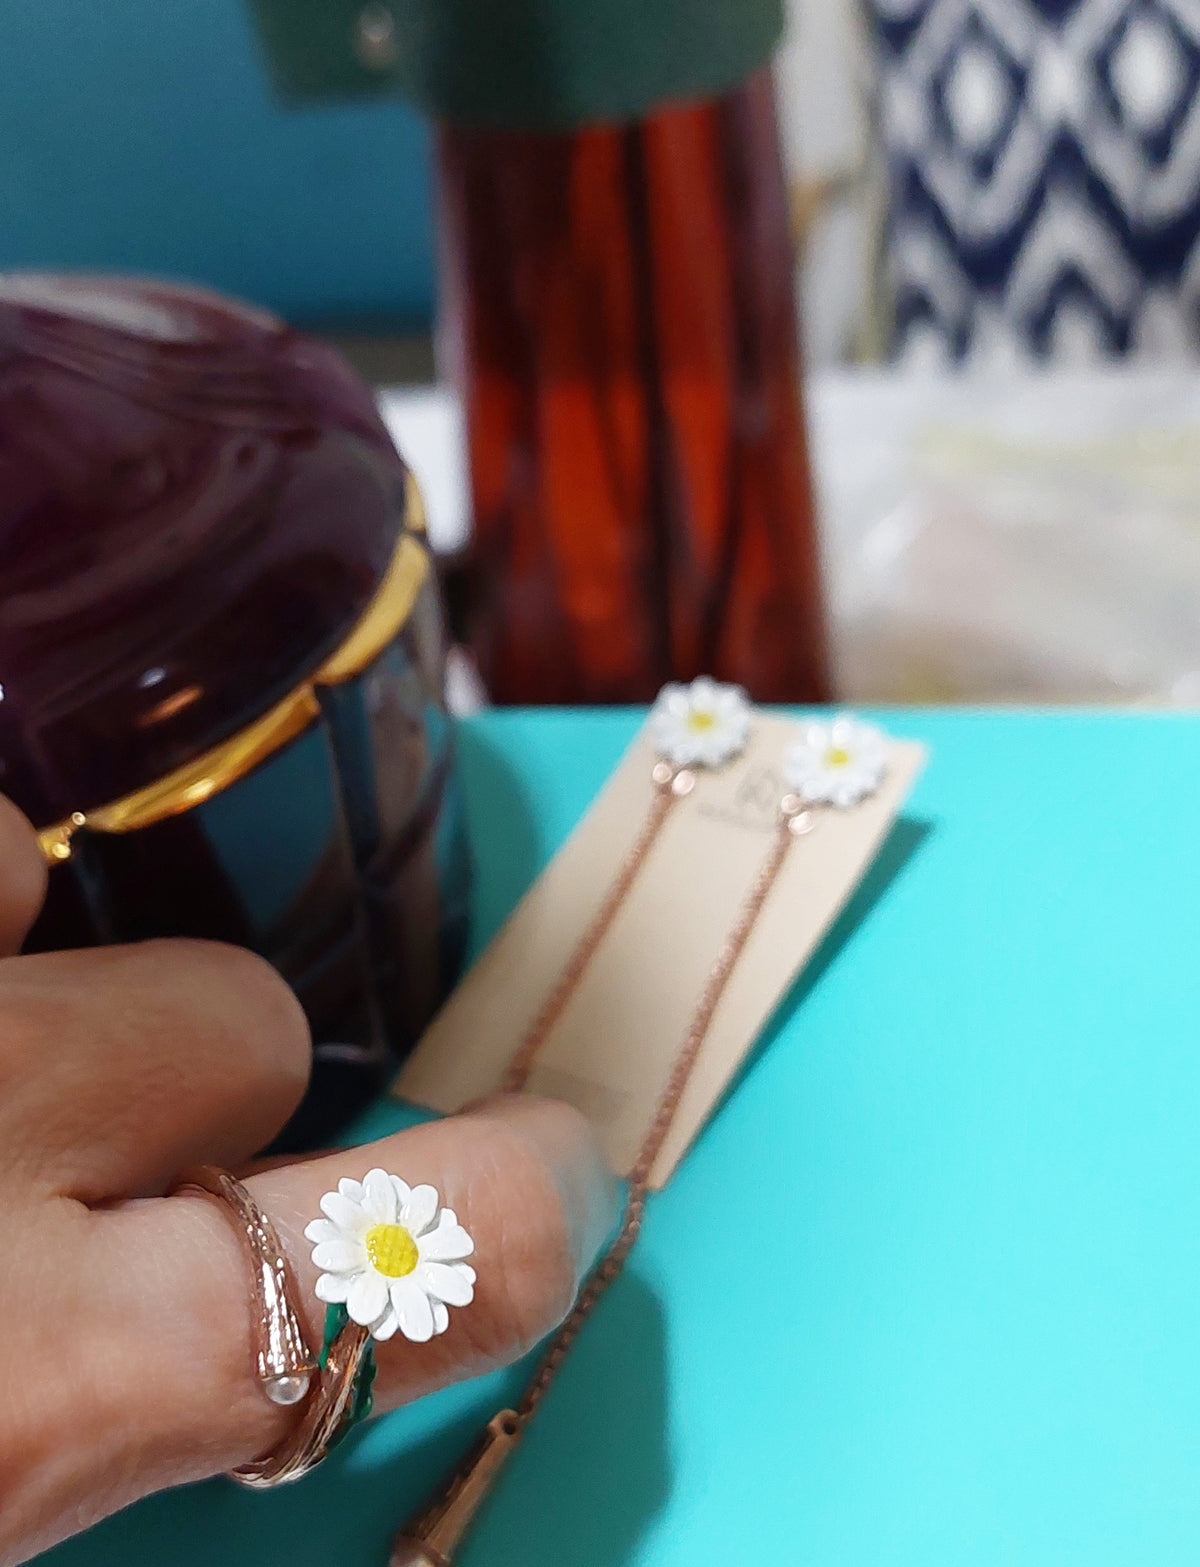 Daisy Jewelry: earrings, bangle, ring (sell separately)